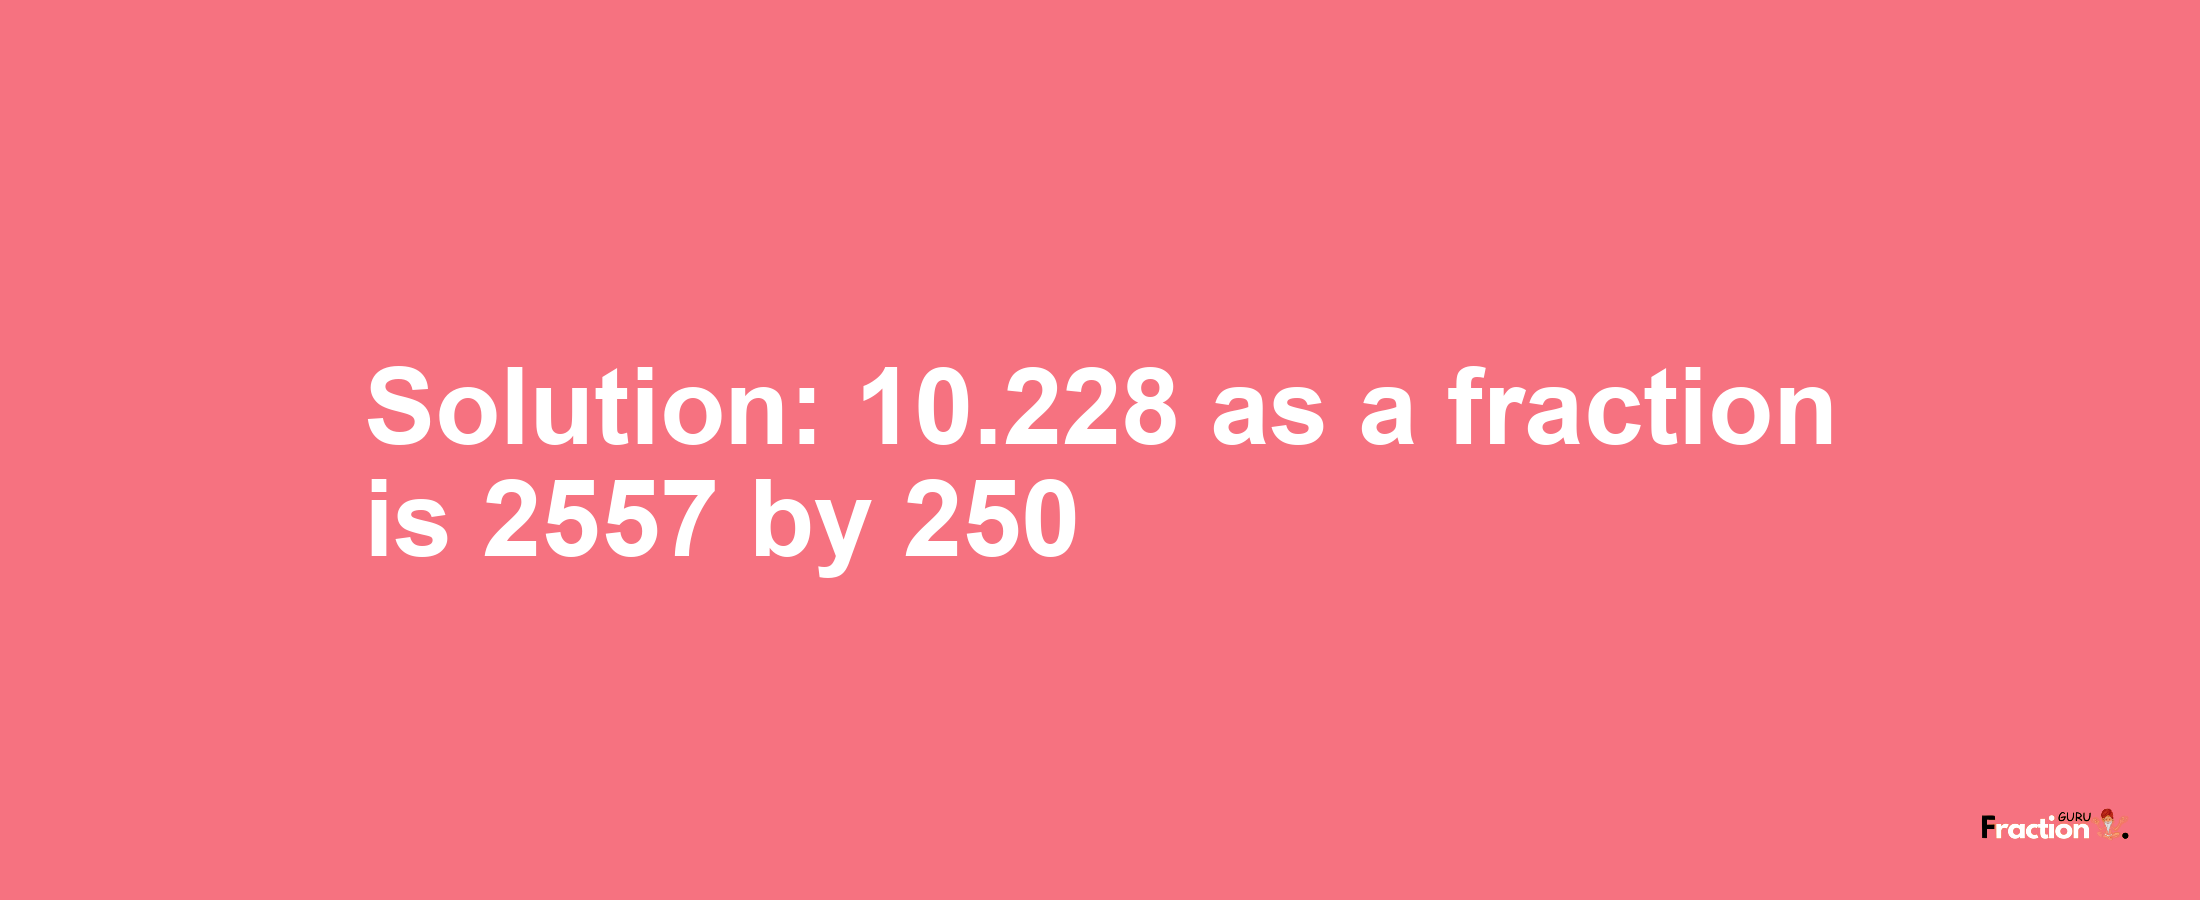 Solution:10.228 as a fraction is 2557/250